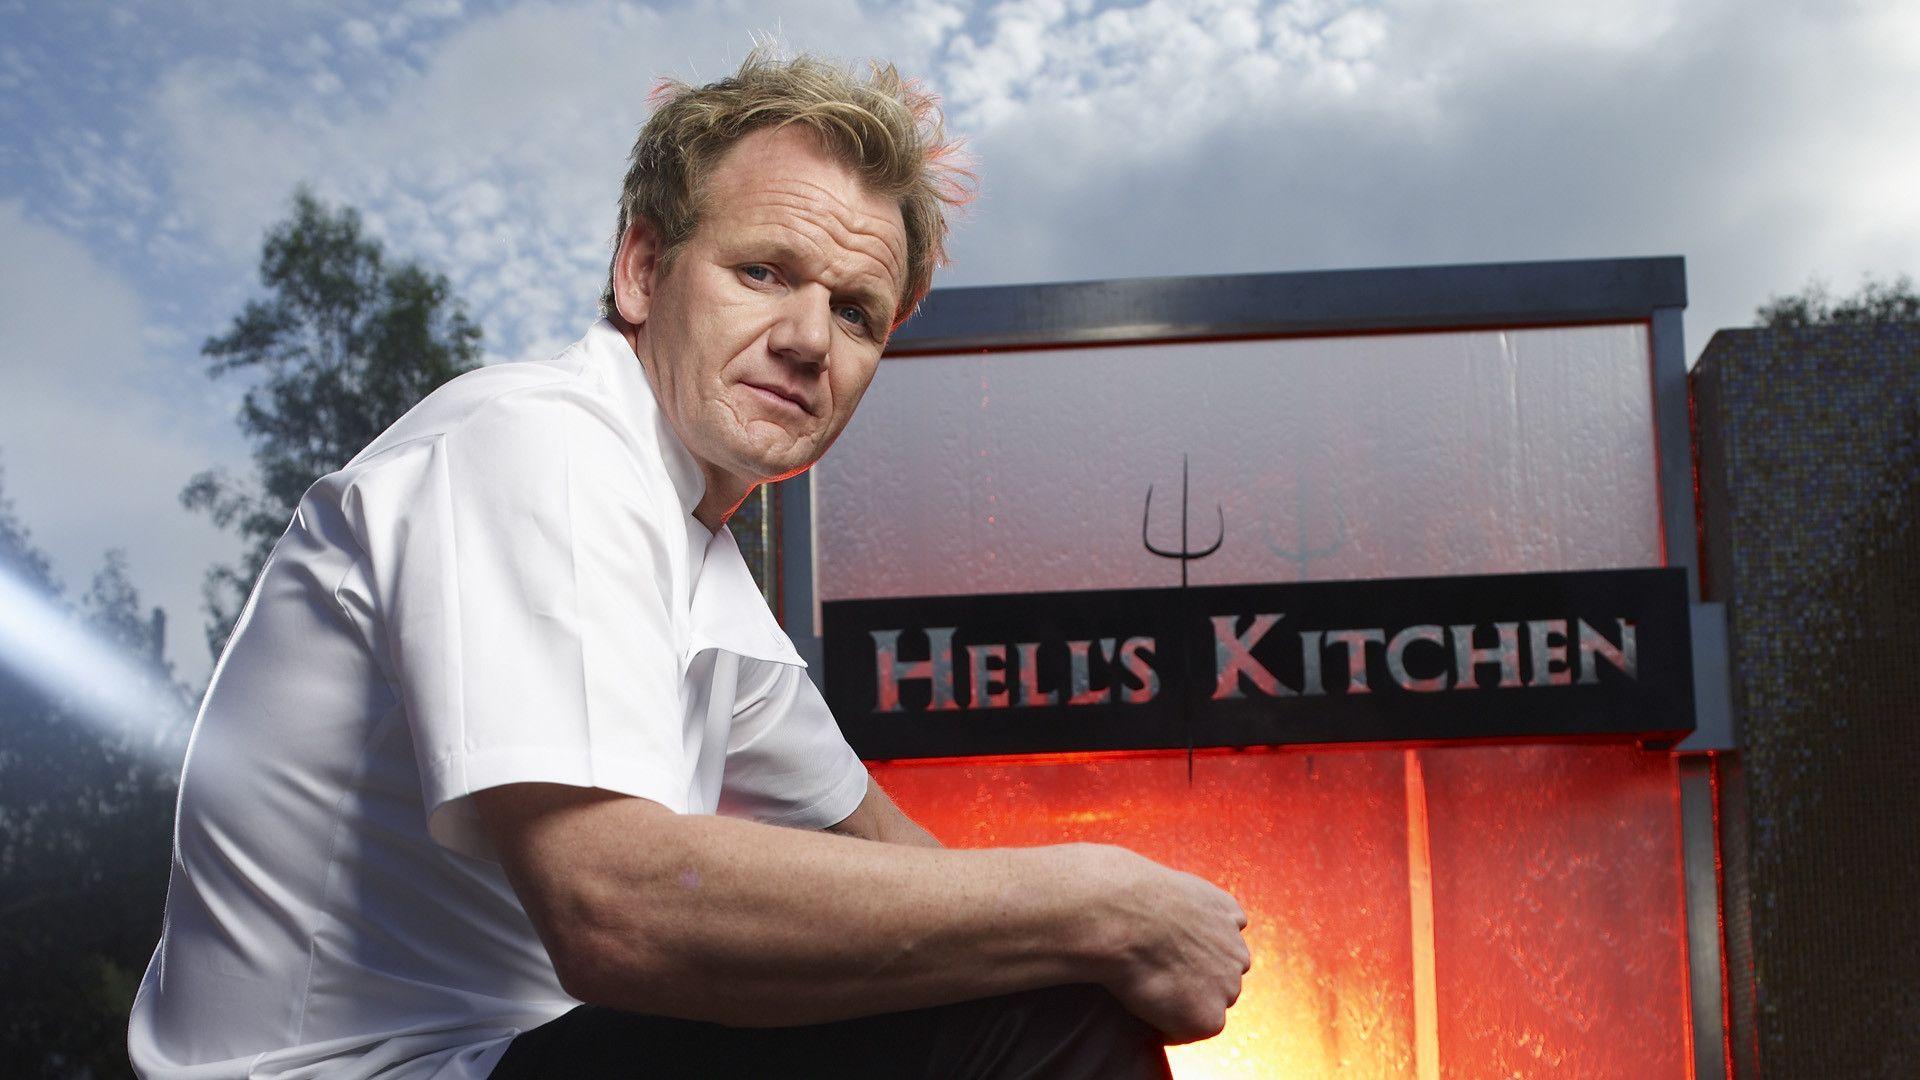 Gordon Ramsay In Hell&Kitchen Poster Wallpapers Wide or HD.